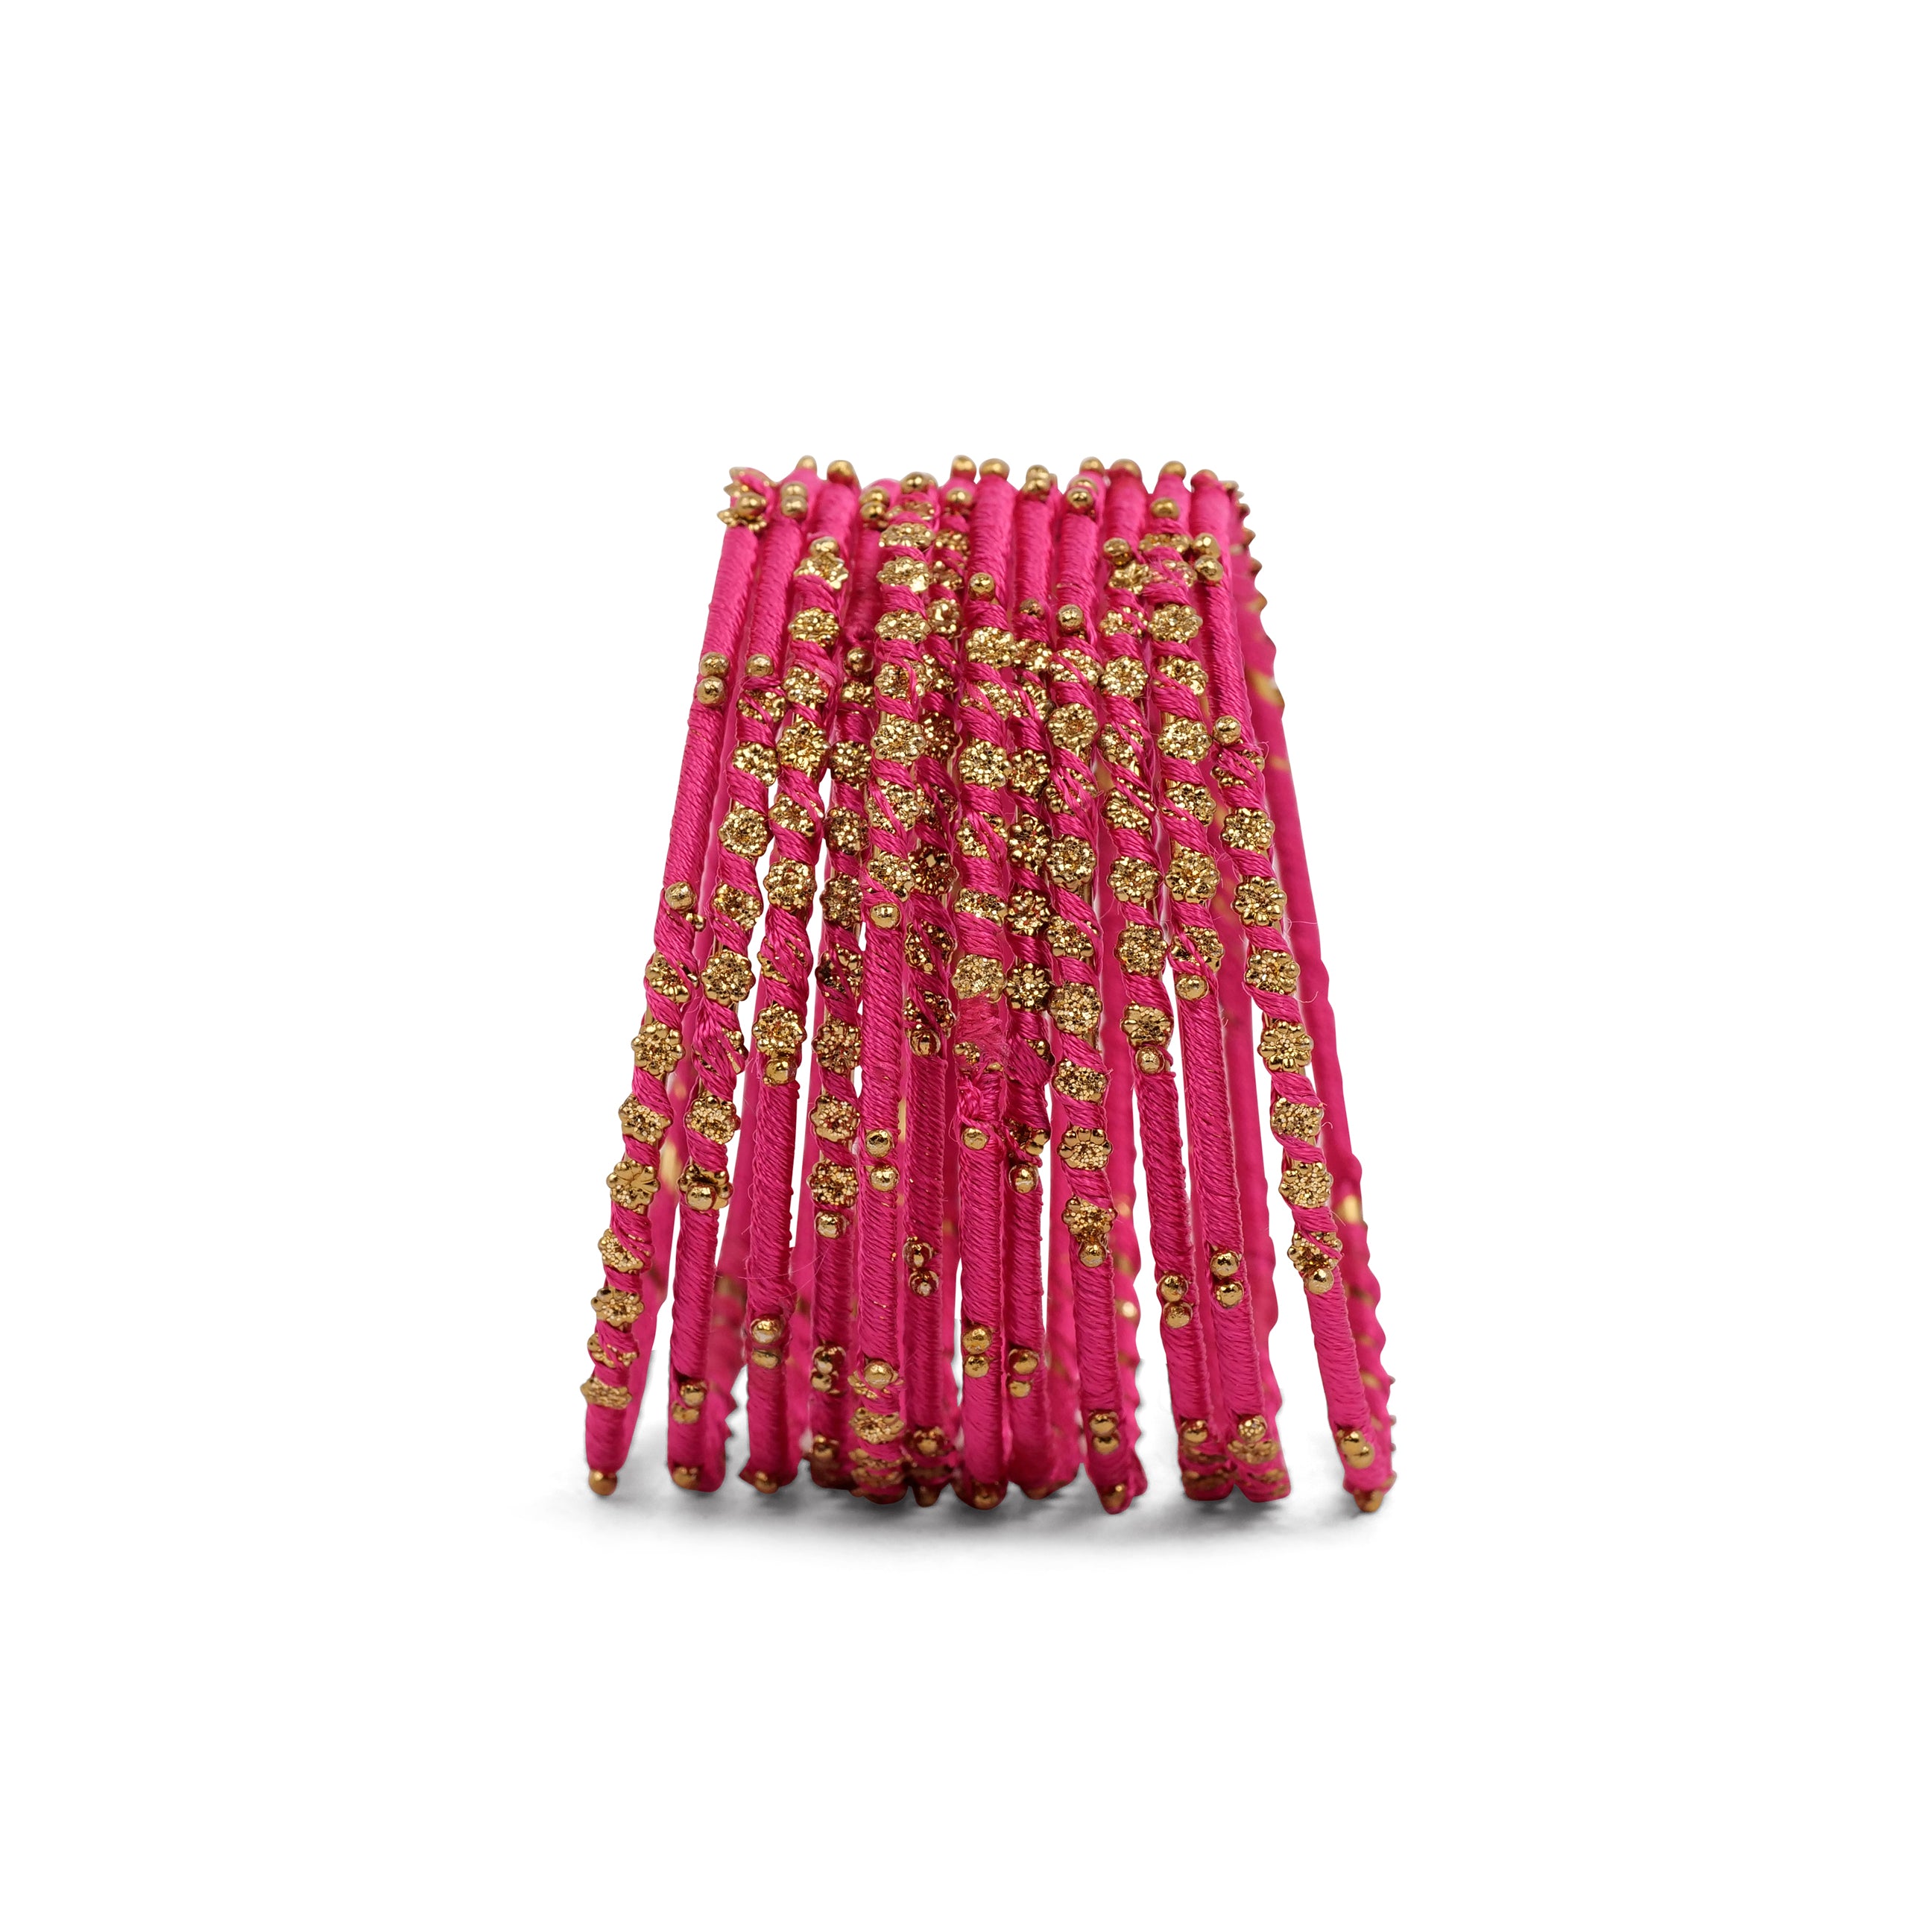 Set of 12 Floral Thead Bangles in Hot Pink